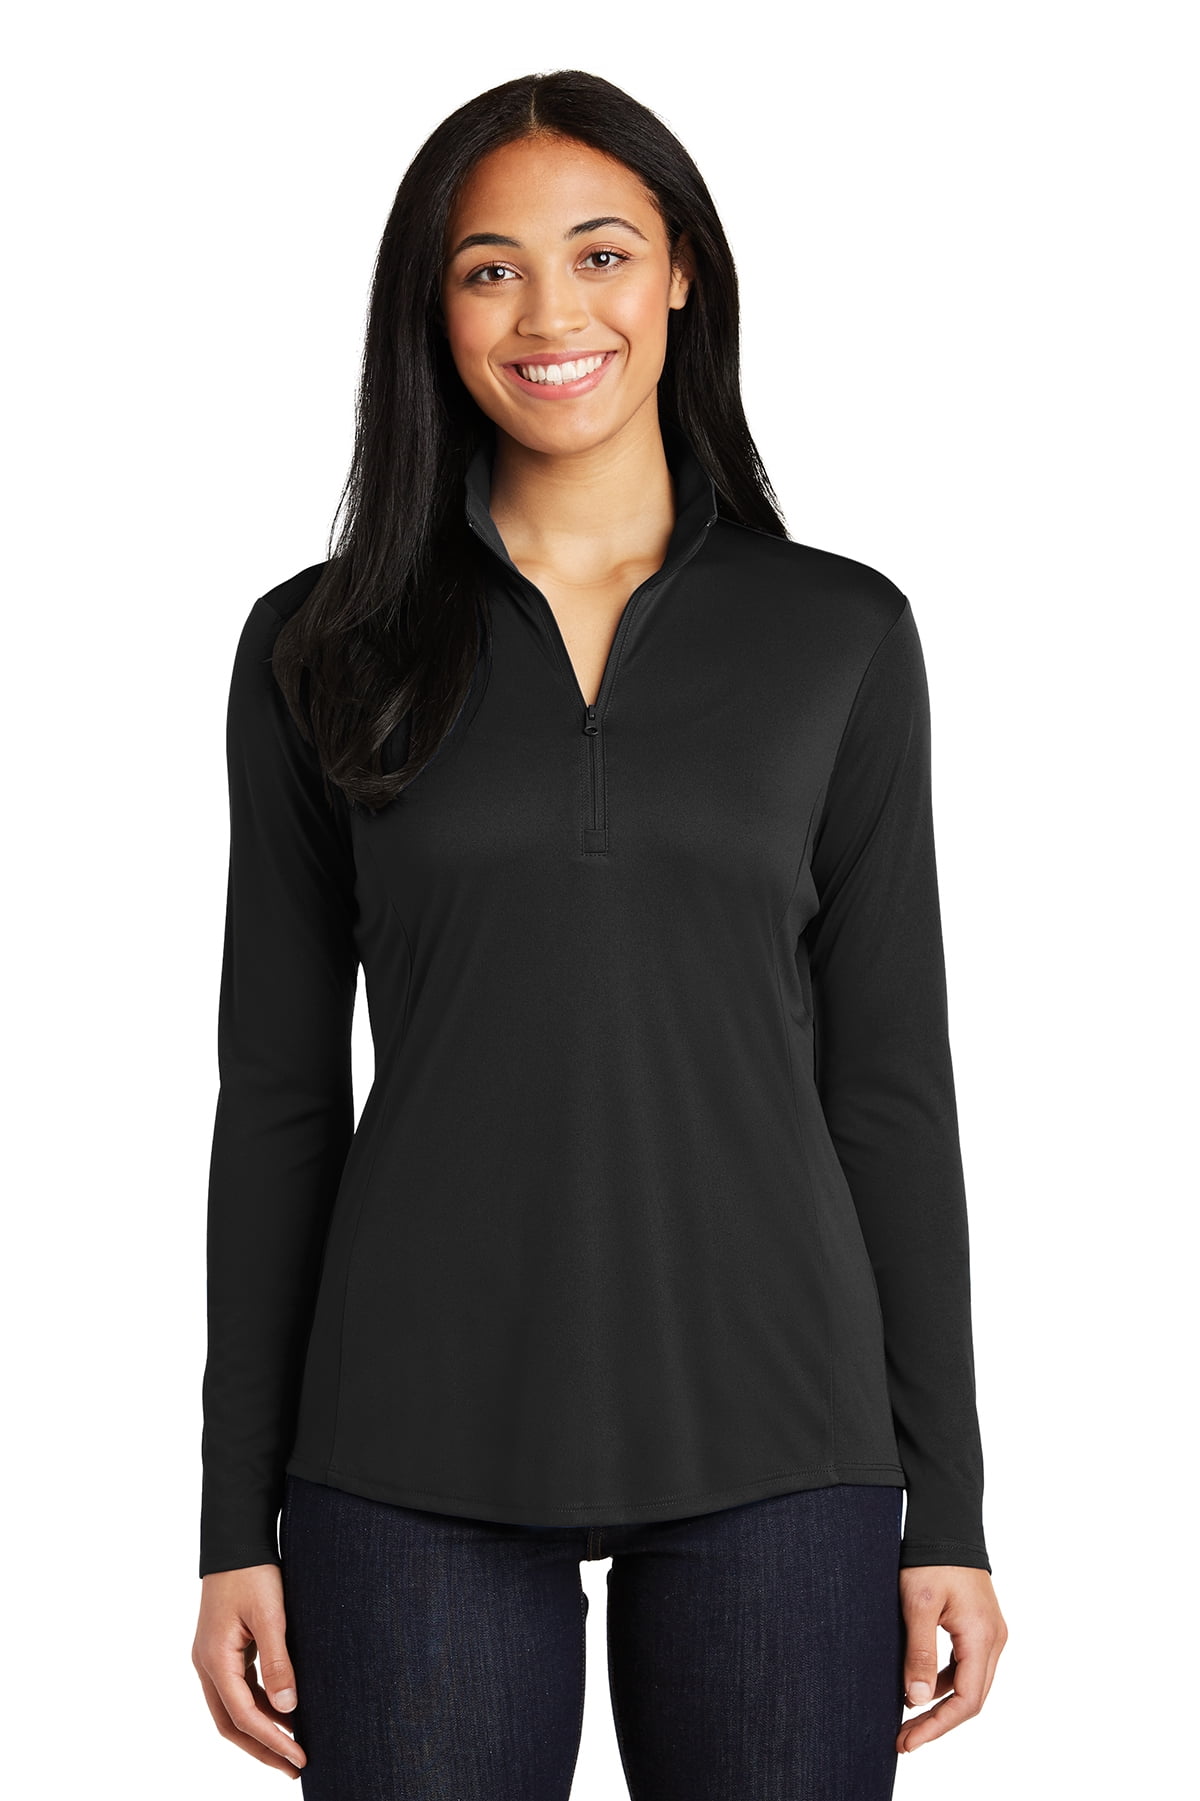 The Weather Company Womens 1/4 Zip Mock Pullover Black XL